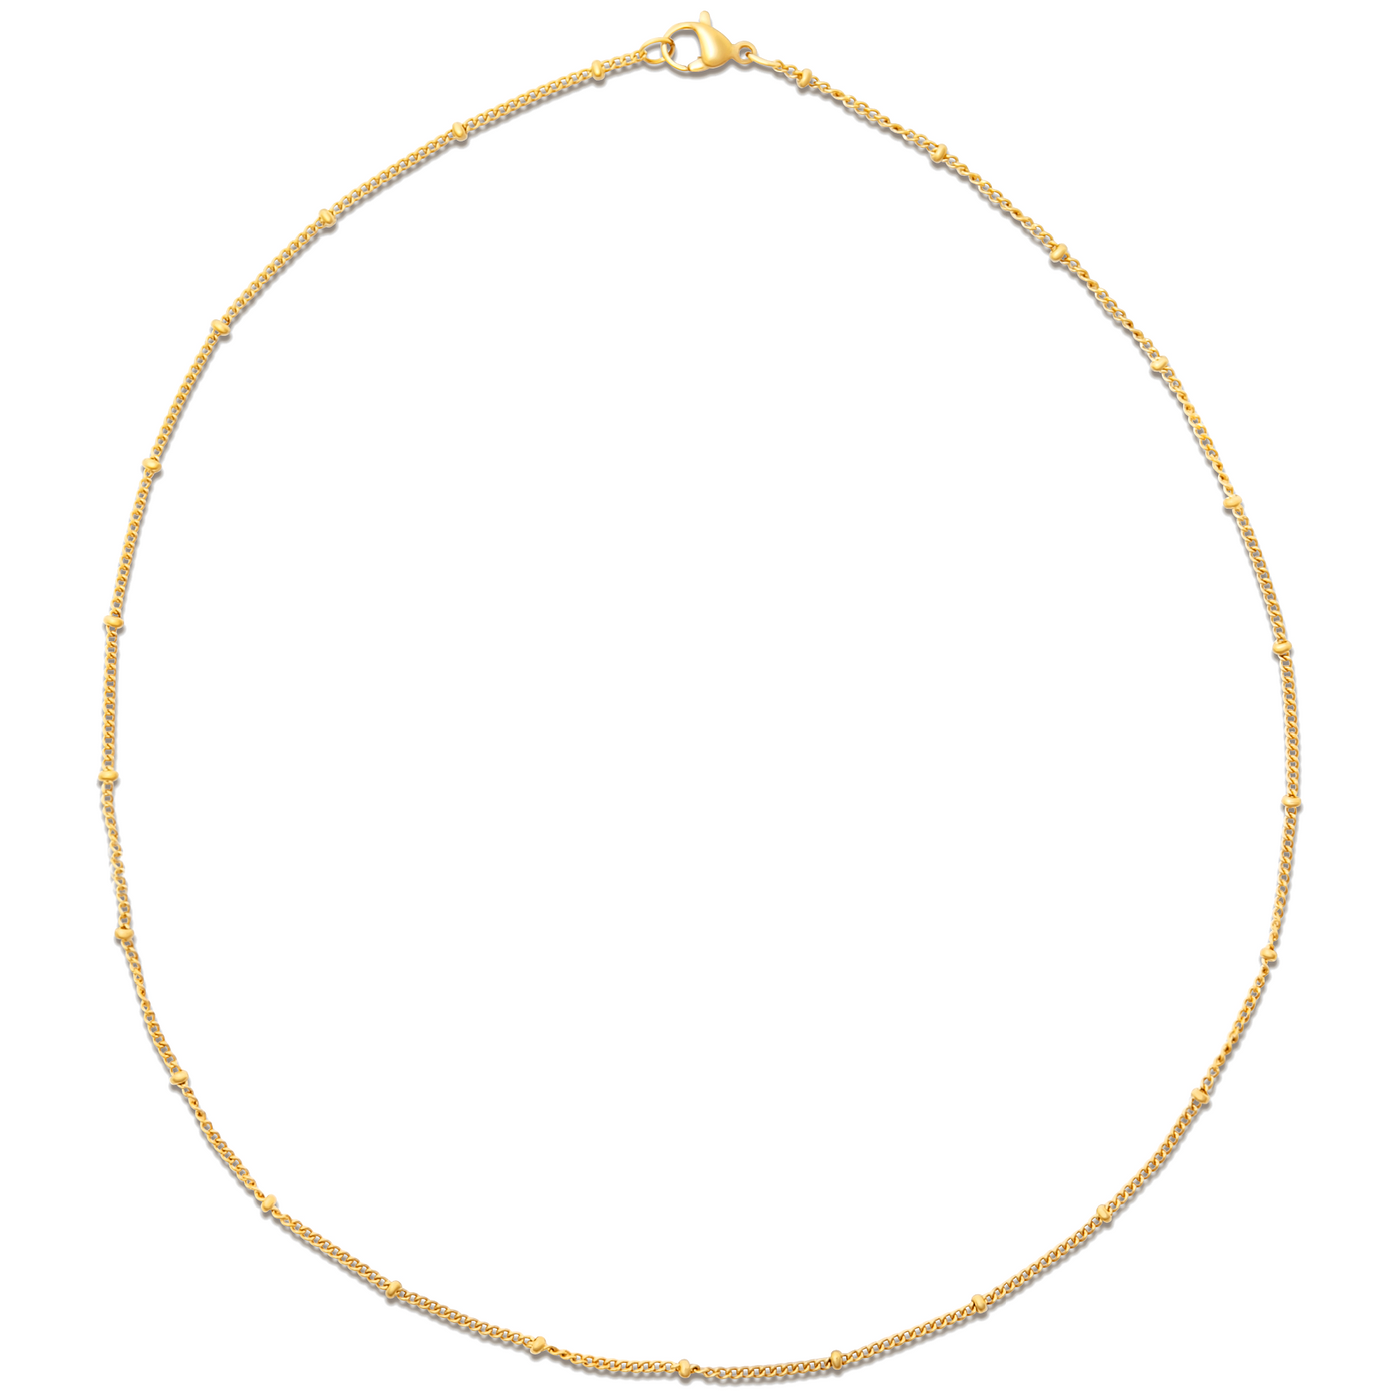 Helsa Dainty Beaded Chain Necklace - Ellie Vail